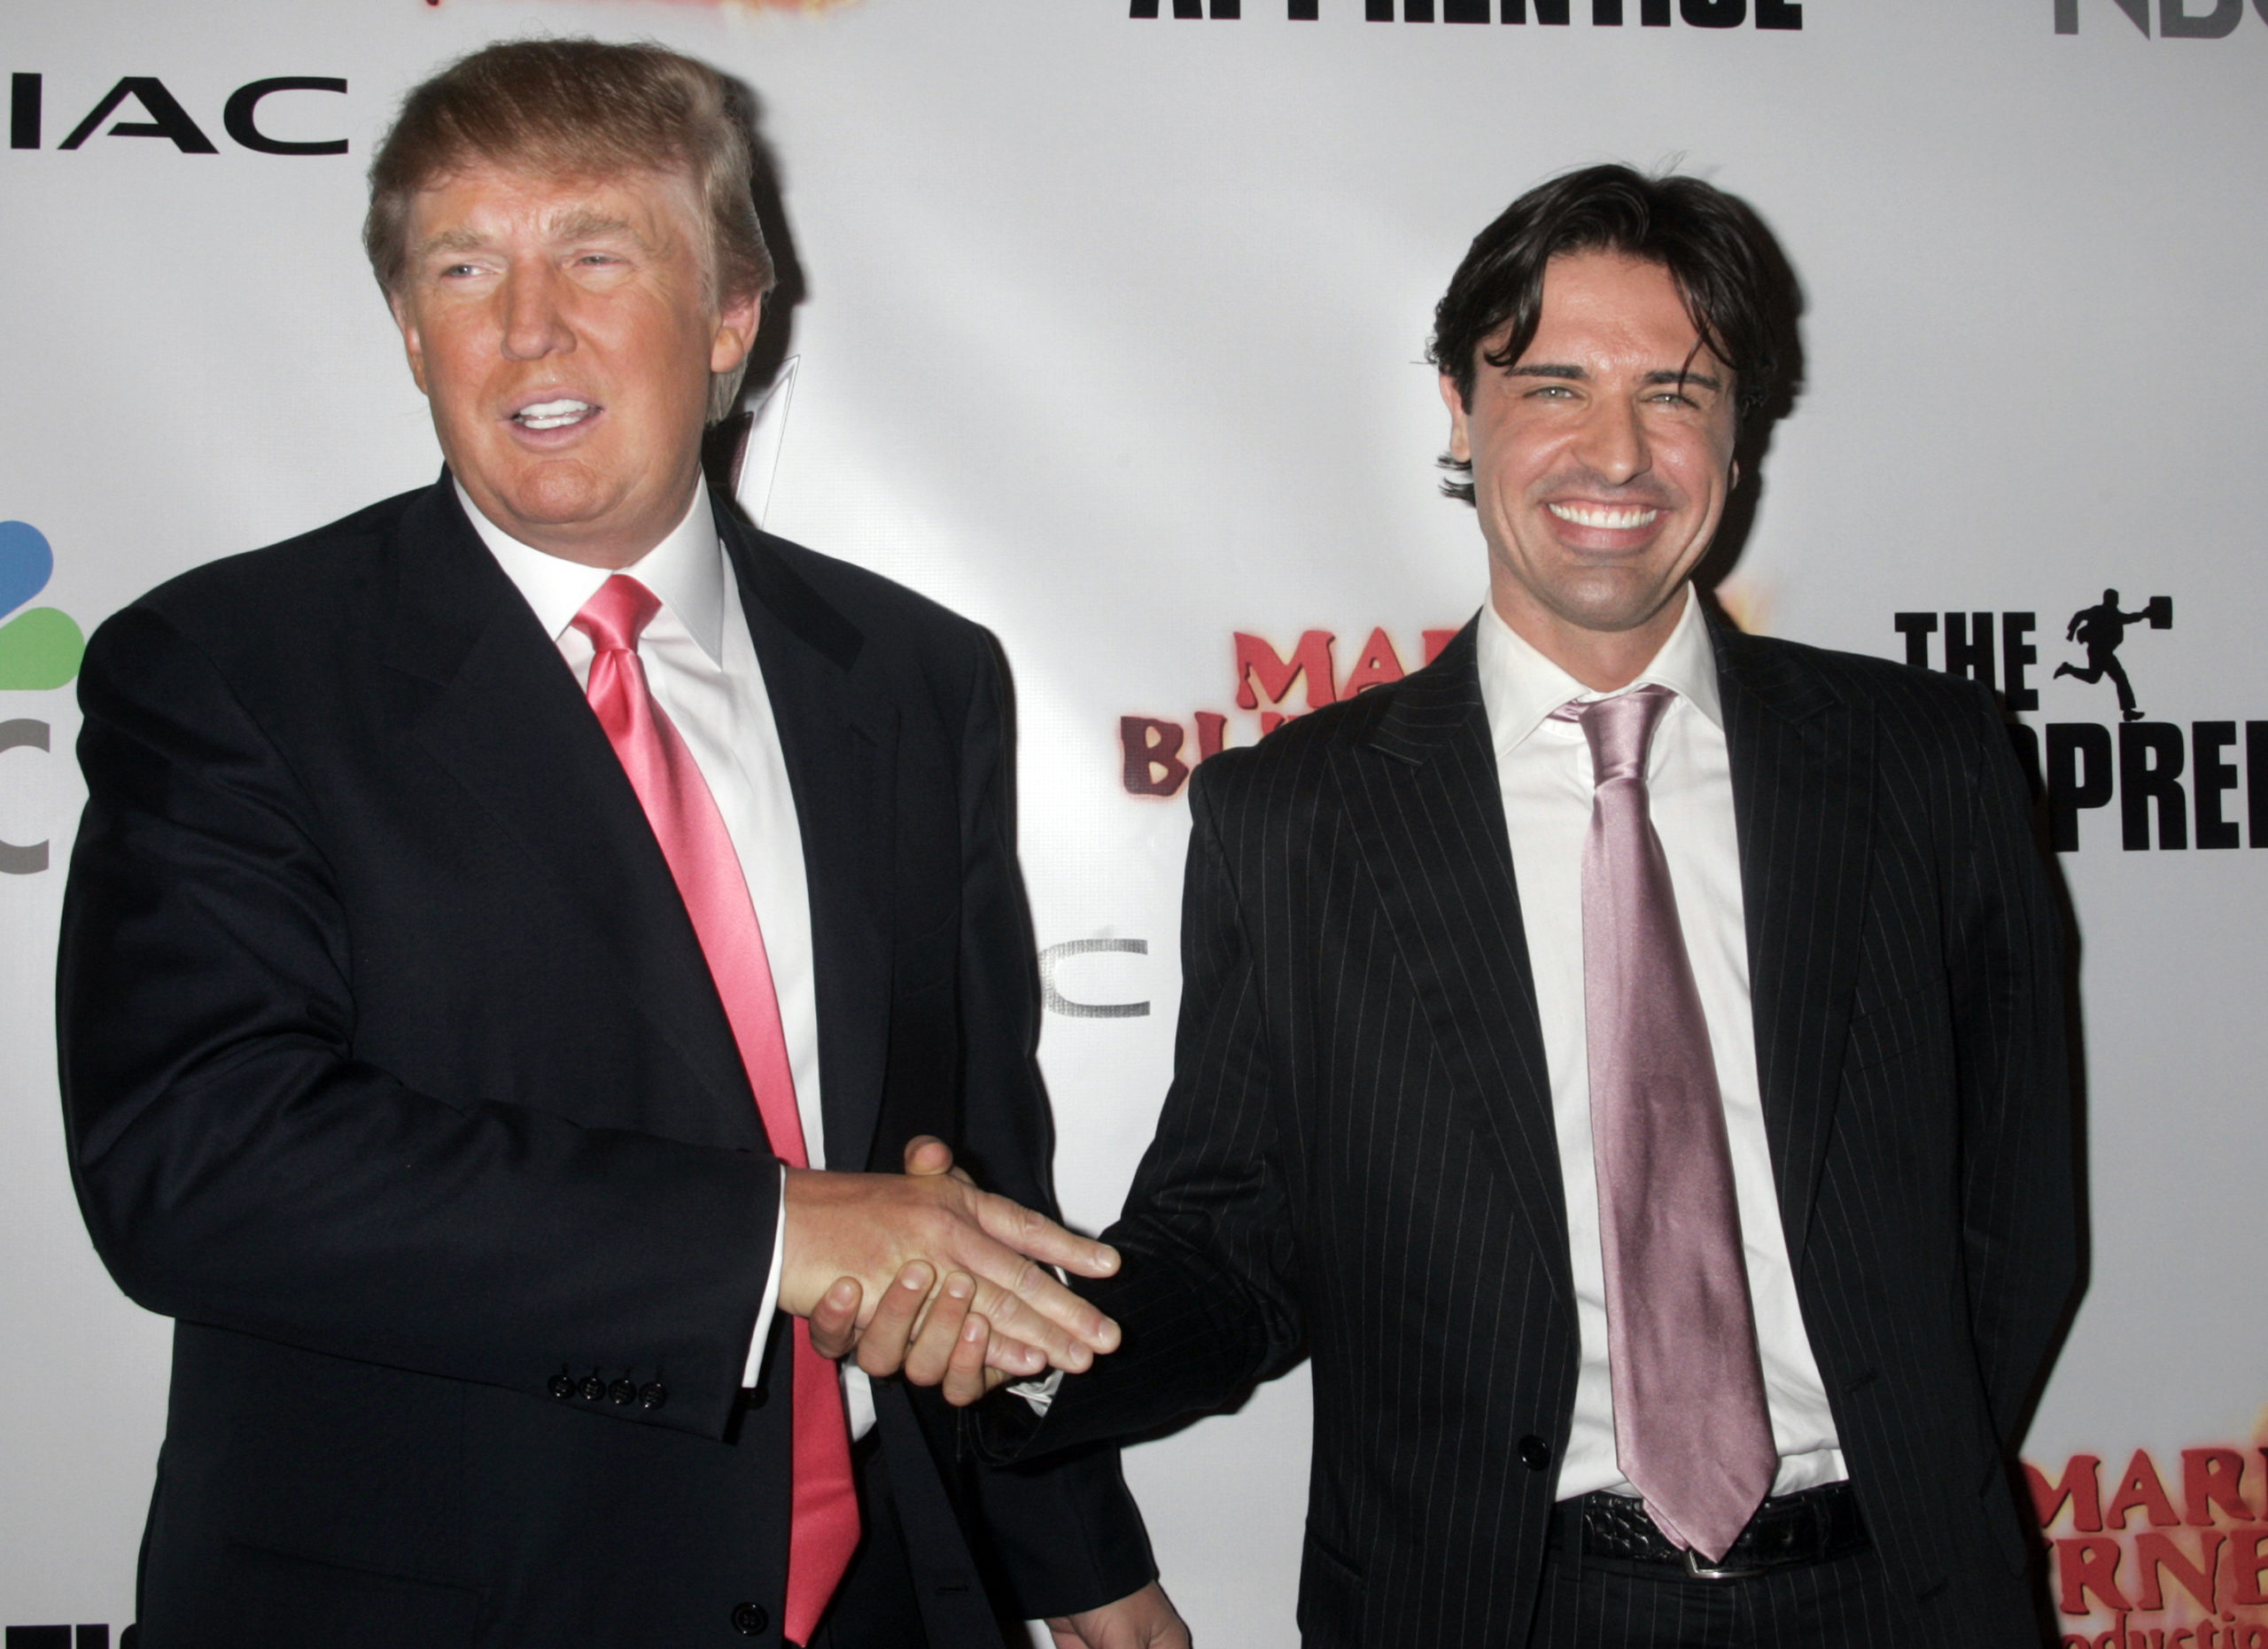 Donald Trump (L), entrepreneur and host of the television reality series "The Apprentice", congratulates the winner of season five of "The Apprentice", Sean Yazbeck, at the party following the live telecast in Los Angeles, California June 5, 2006.